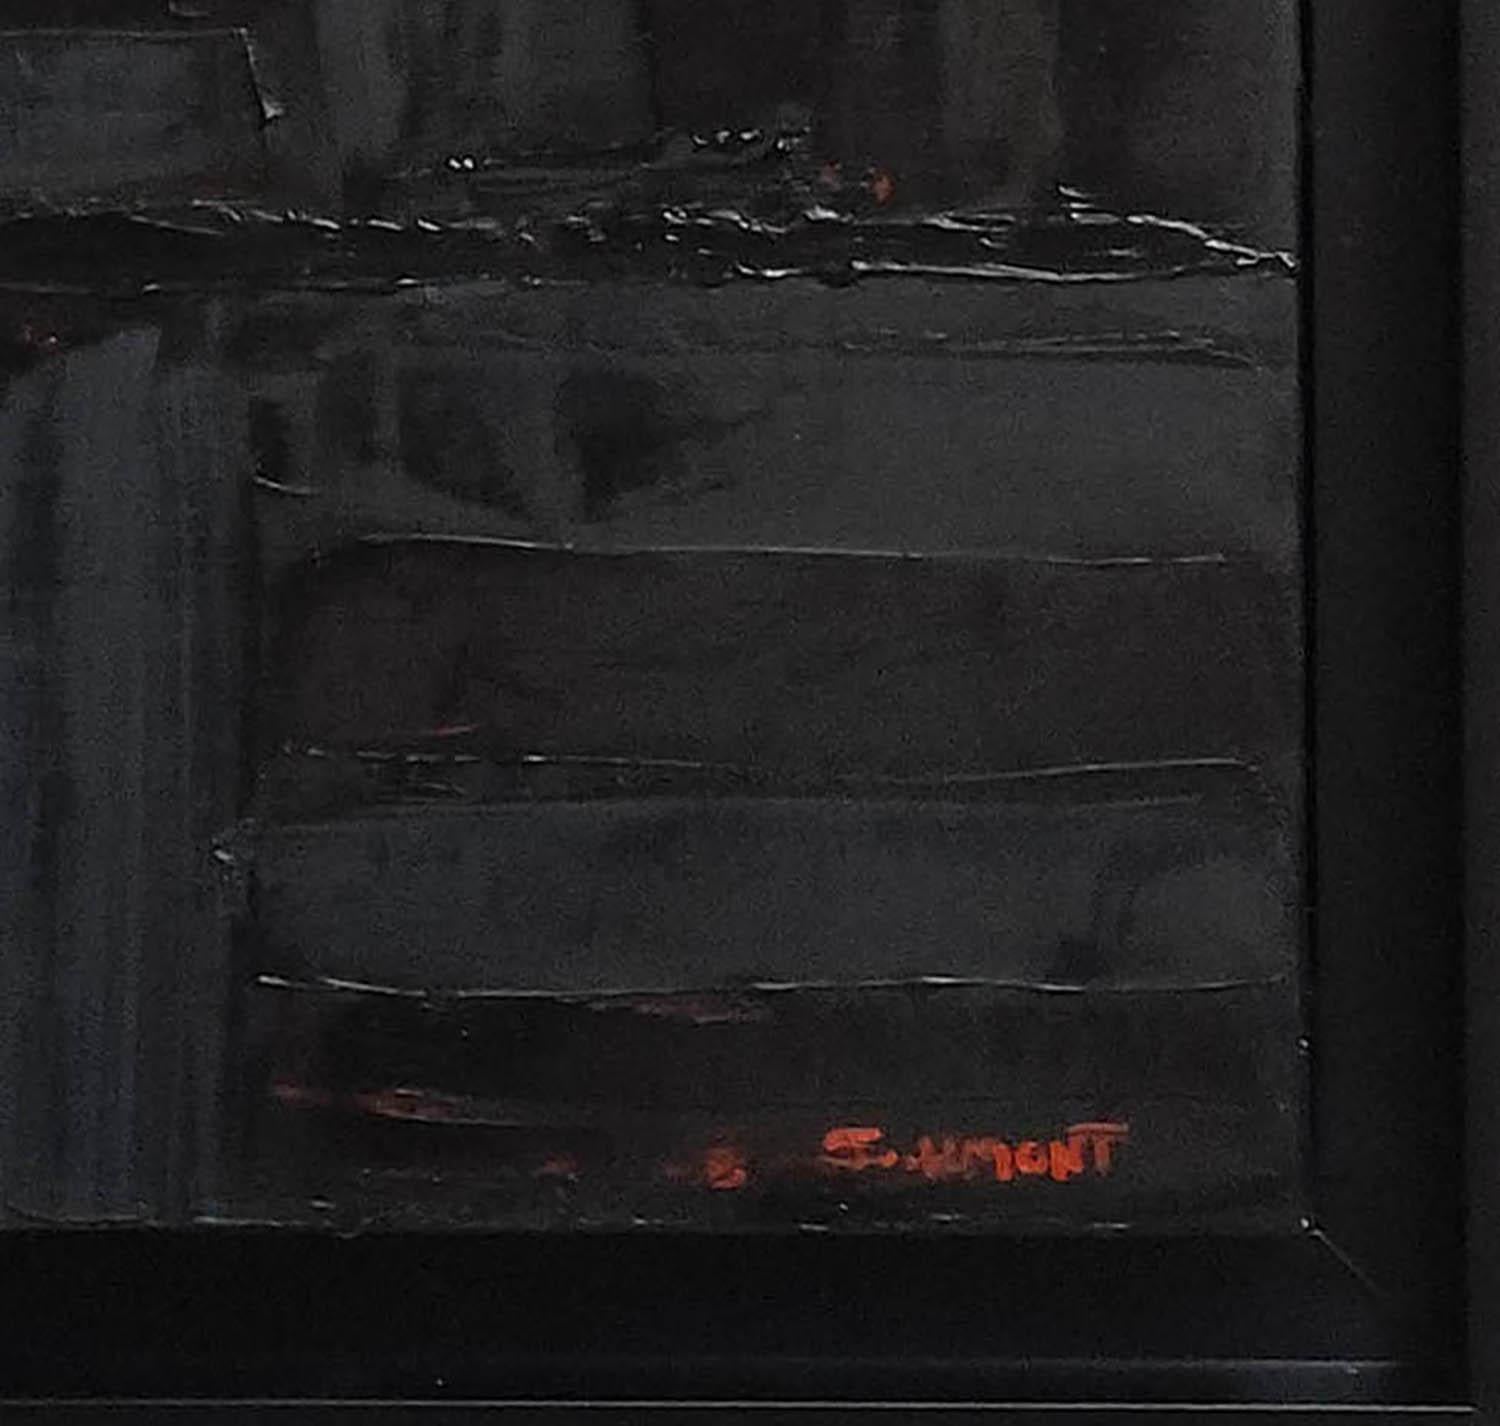 nightfall, oil, black abstract; library,  books, contempory art, minimalism - Minimalist Painting by SOPHIE DUMONT